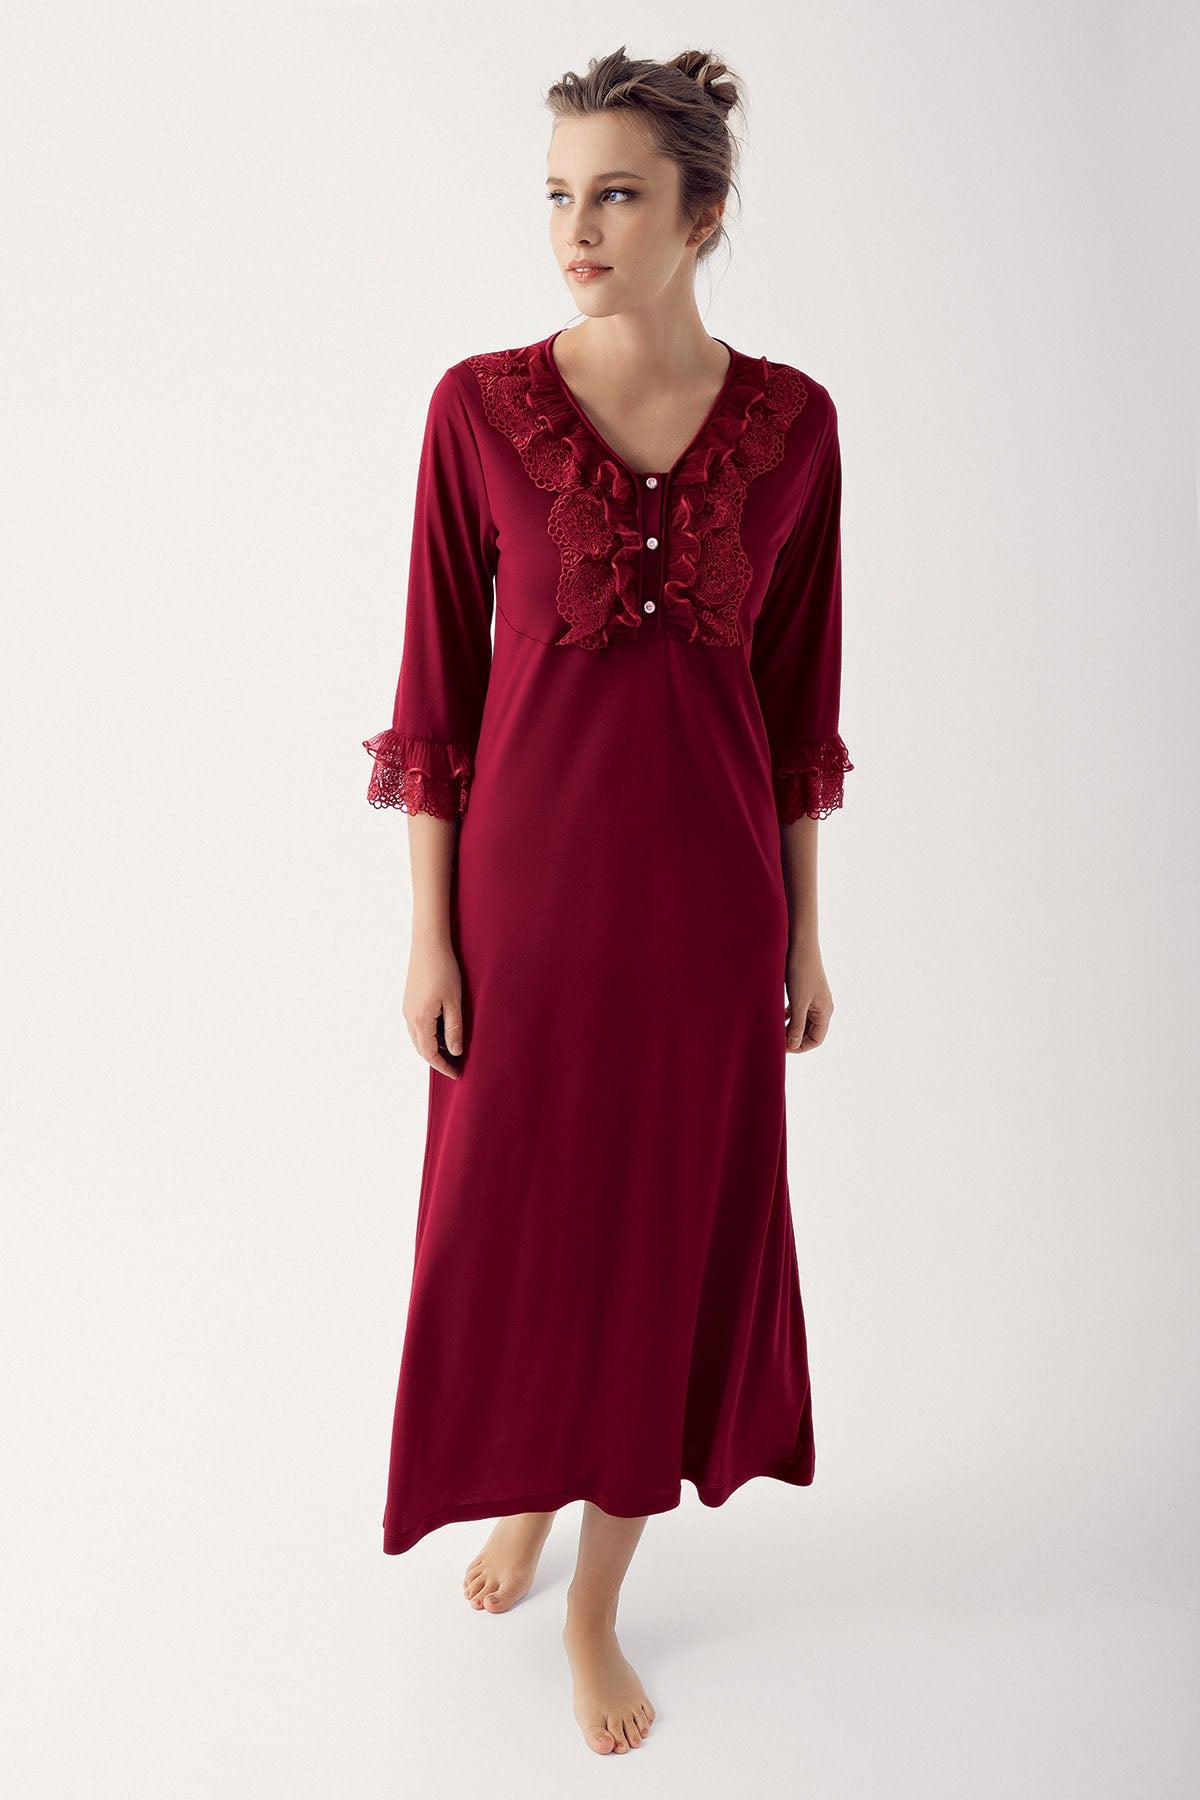 Leaf Lace Maternity & Nursing Nightgown Claret Red - 14103